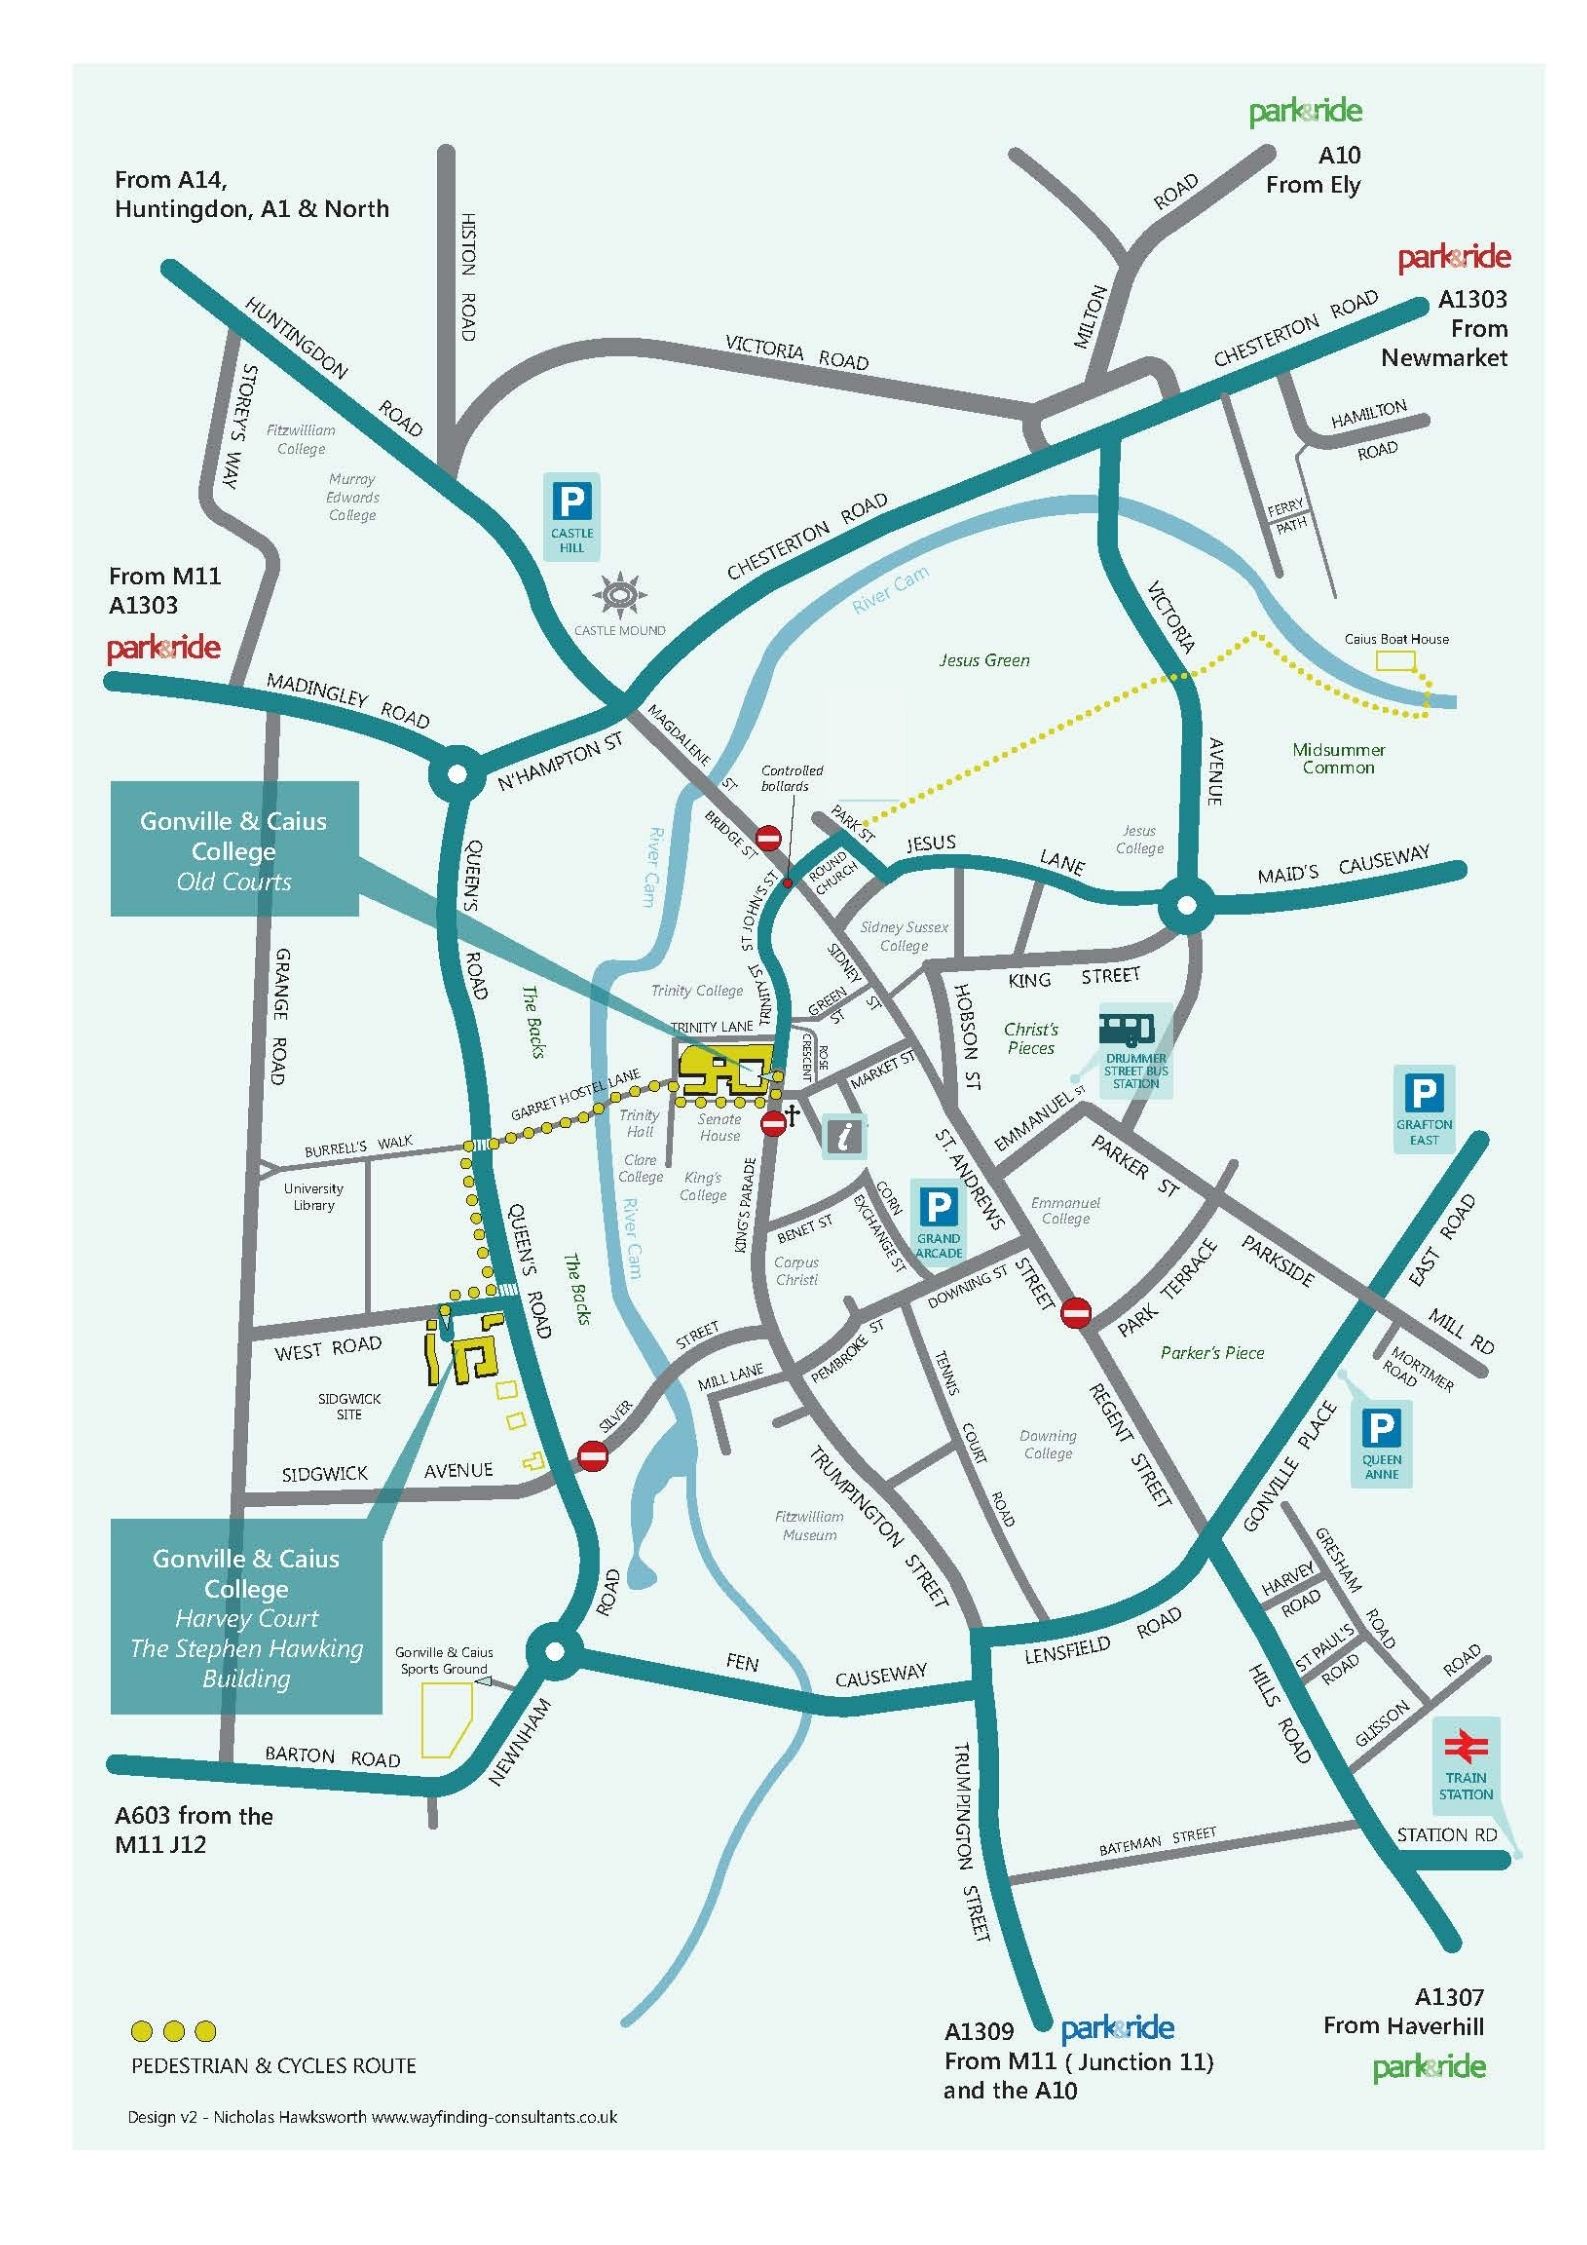 A map of the centre of the city of Cambridge